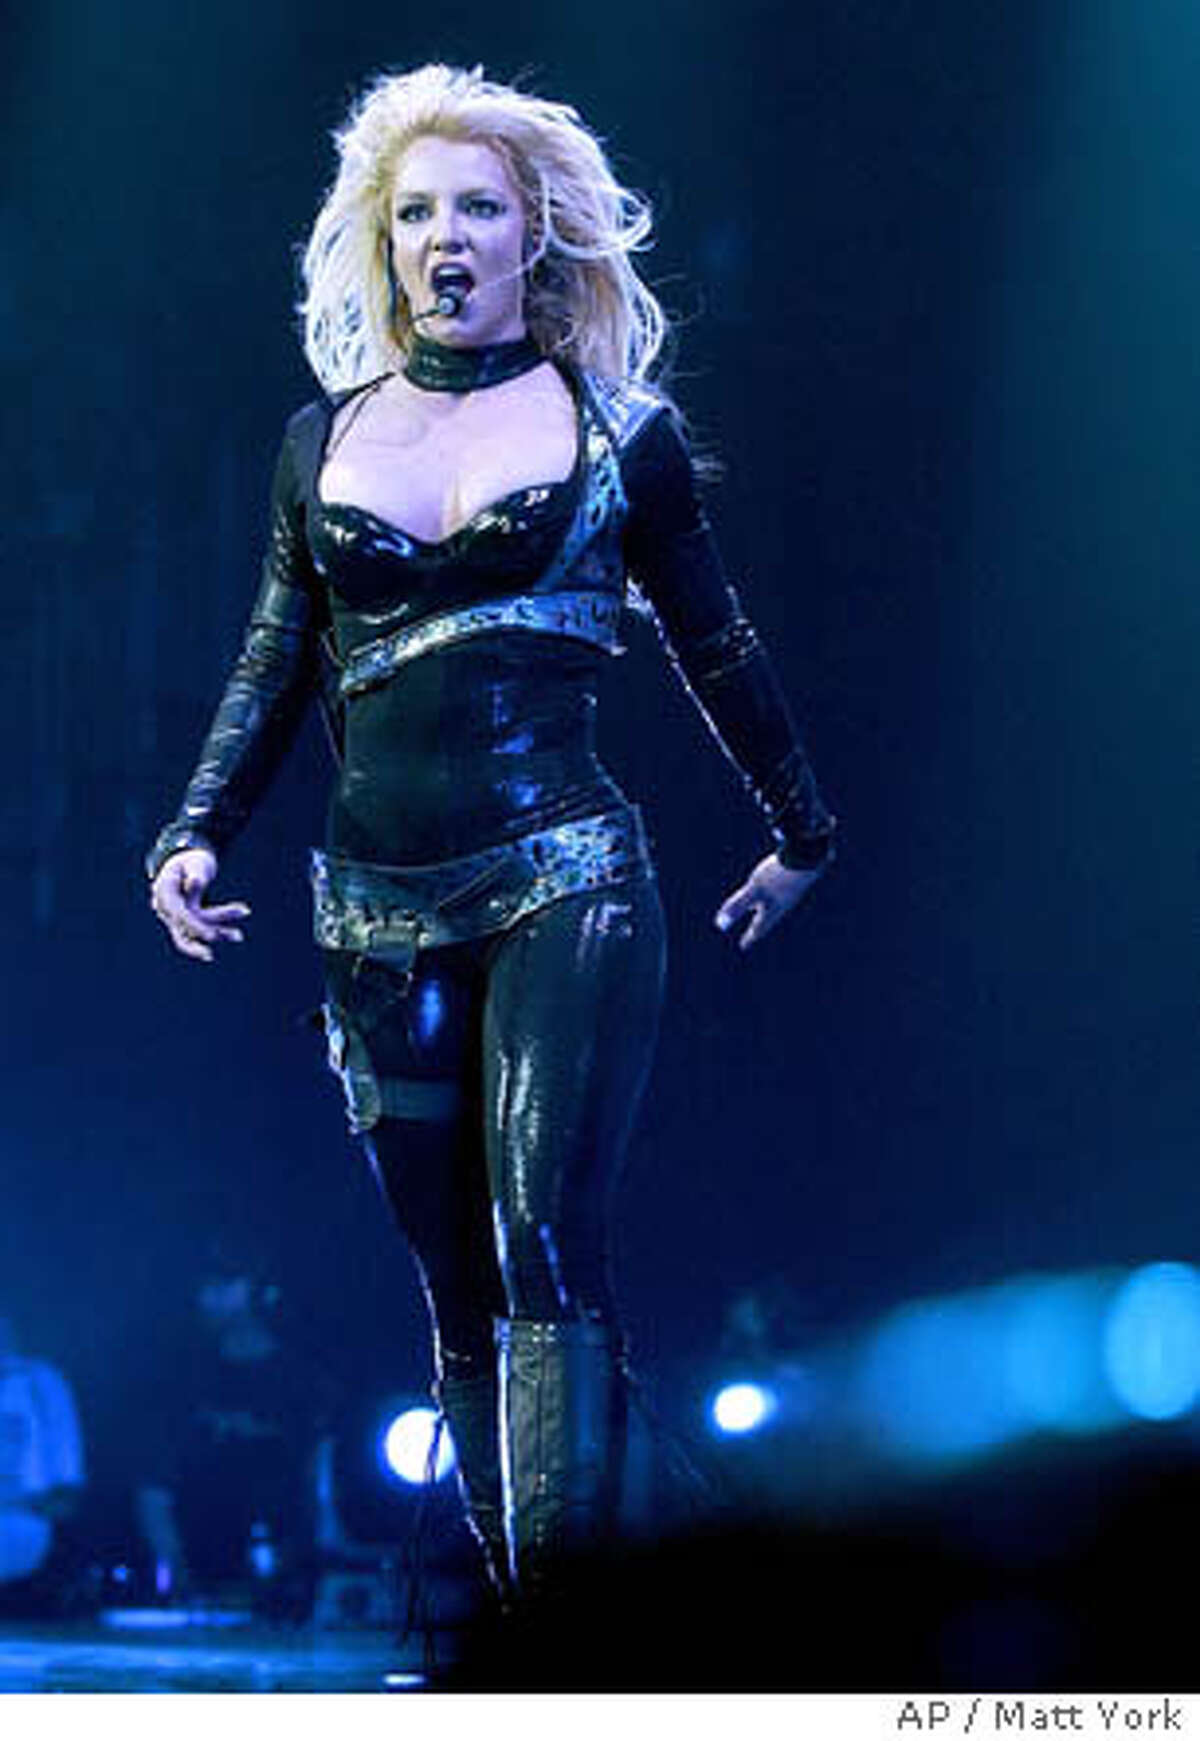 Britney Spears performs during the second show of her ' Onyx Hotel Tour ' March 3, 2004 at Glendale Arena in Glendale, Ariz. Spears will tour numerous cities in North America before visiting Europe, Latin America and Asia throughout 2004 as she promotes her multi platinum album 'In the Zone.' (AP Photo/Matt York)